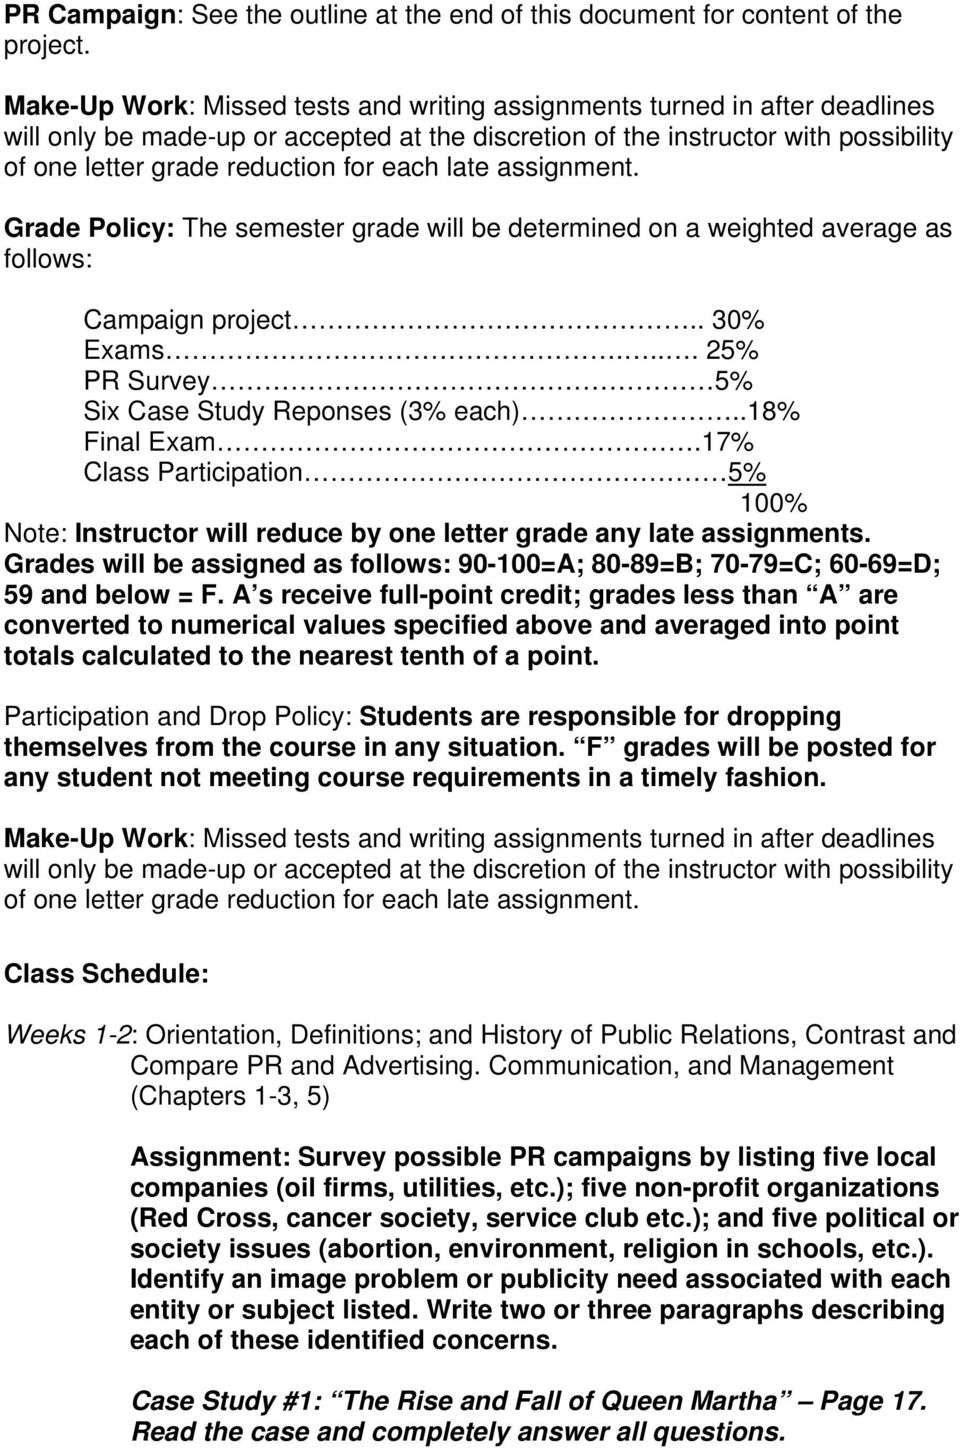 each late assignment. Grade Policy: The semester grade will be determined on a weighted average as follows: Campaign project.. 30% Exams.... 25% PR Survey 5% Six Case Study Reponses (3% each).